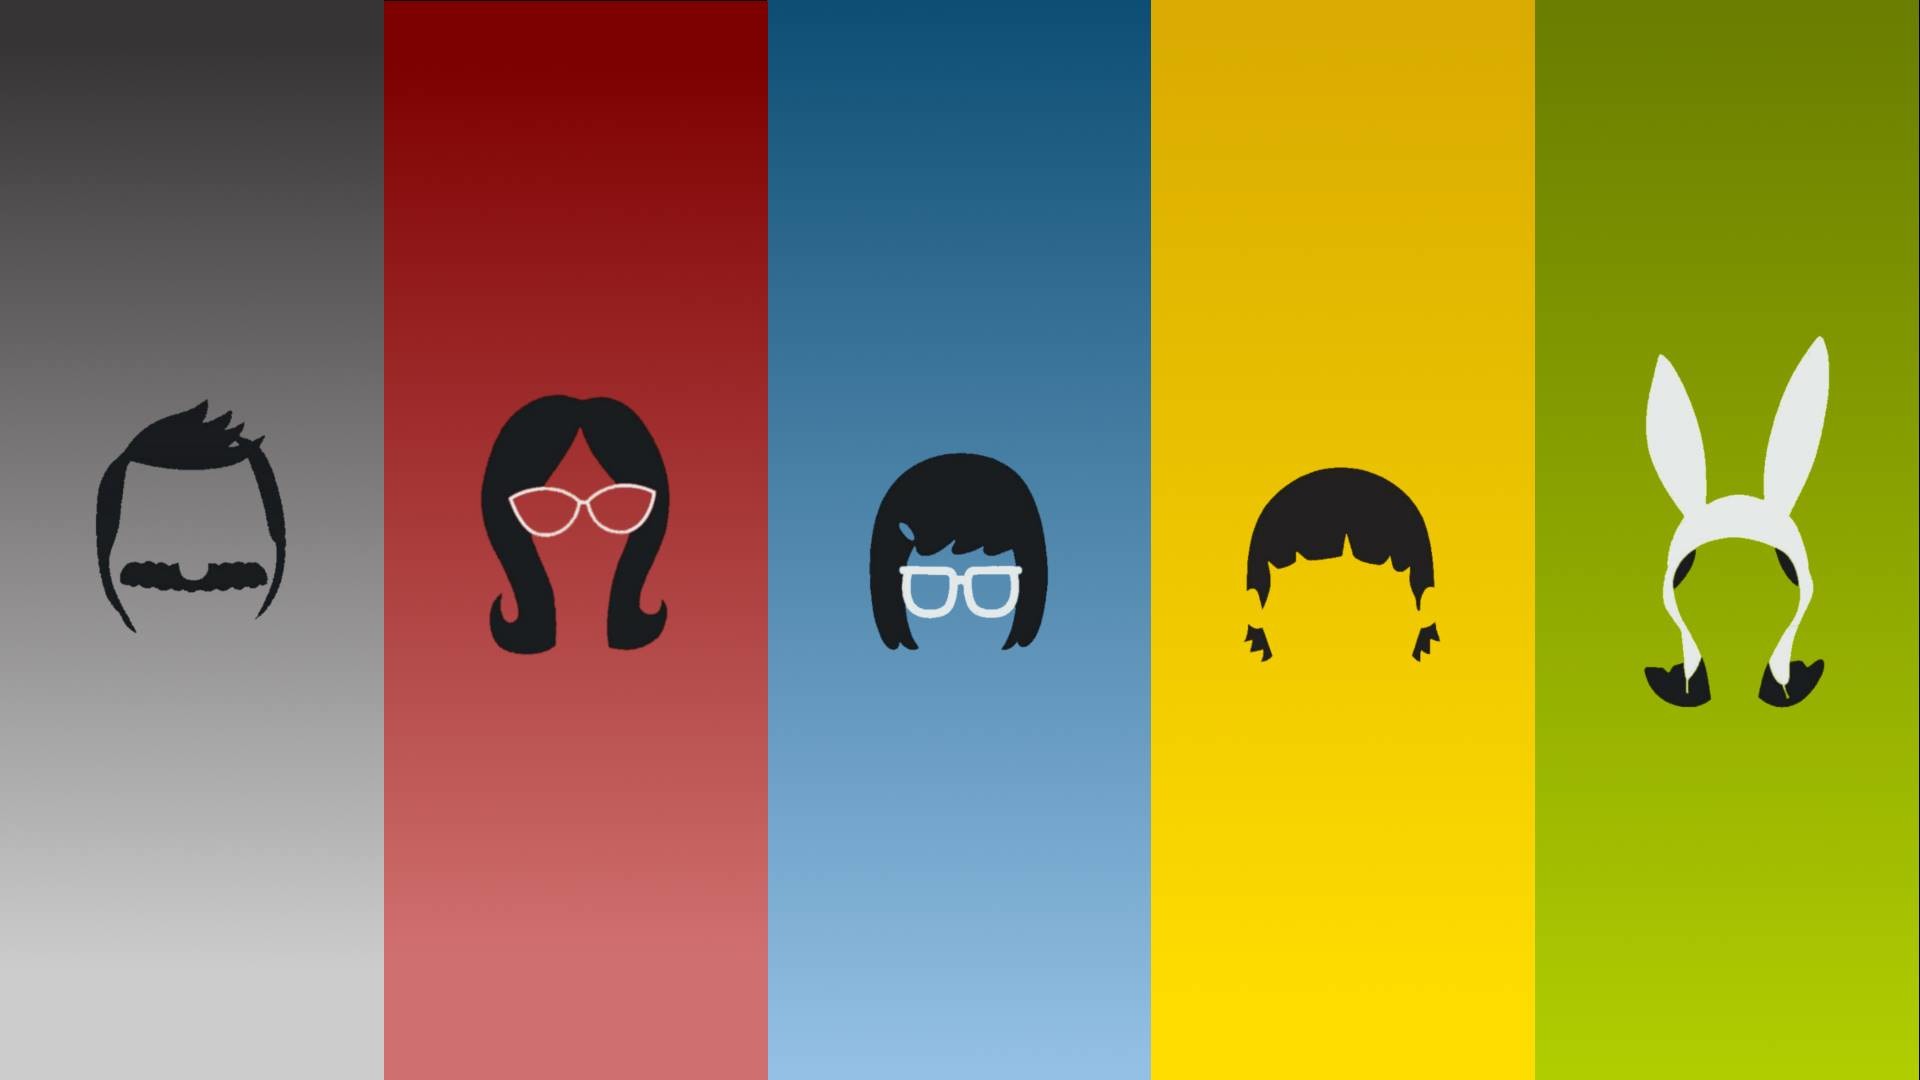 1920x1080 Bob's Burgers Wallpaper. by MIGRANE0Aug 15 2015. Load 26 more images Grid  view